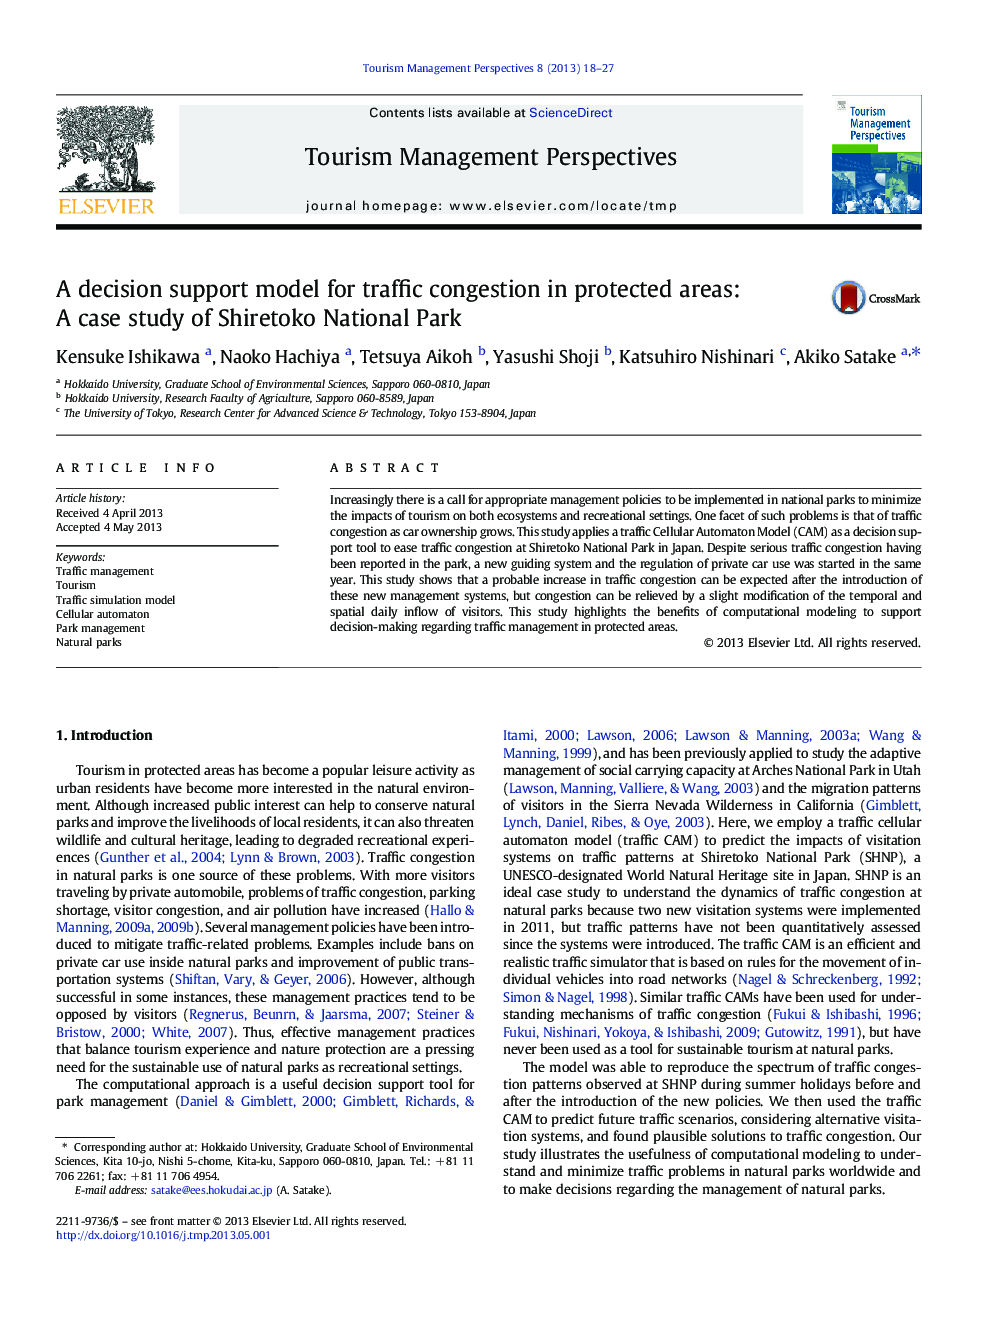 A decision support model for traffic congestion in protected areas: A case study of Shiretoko National Park